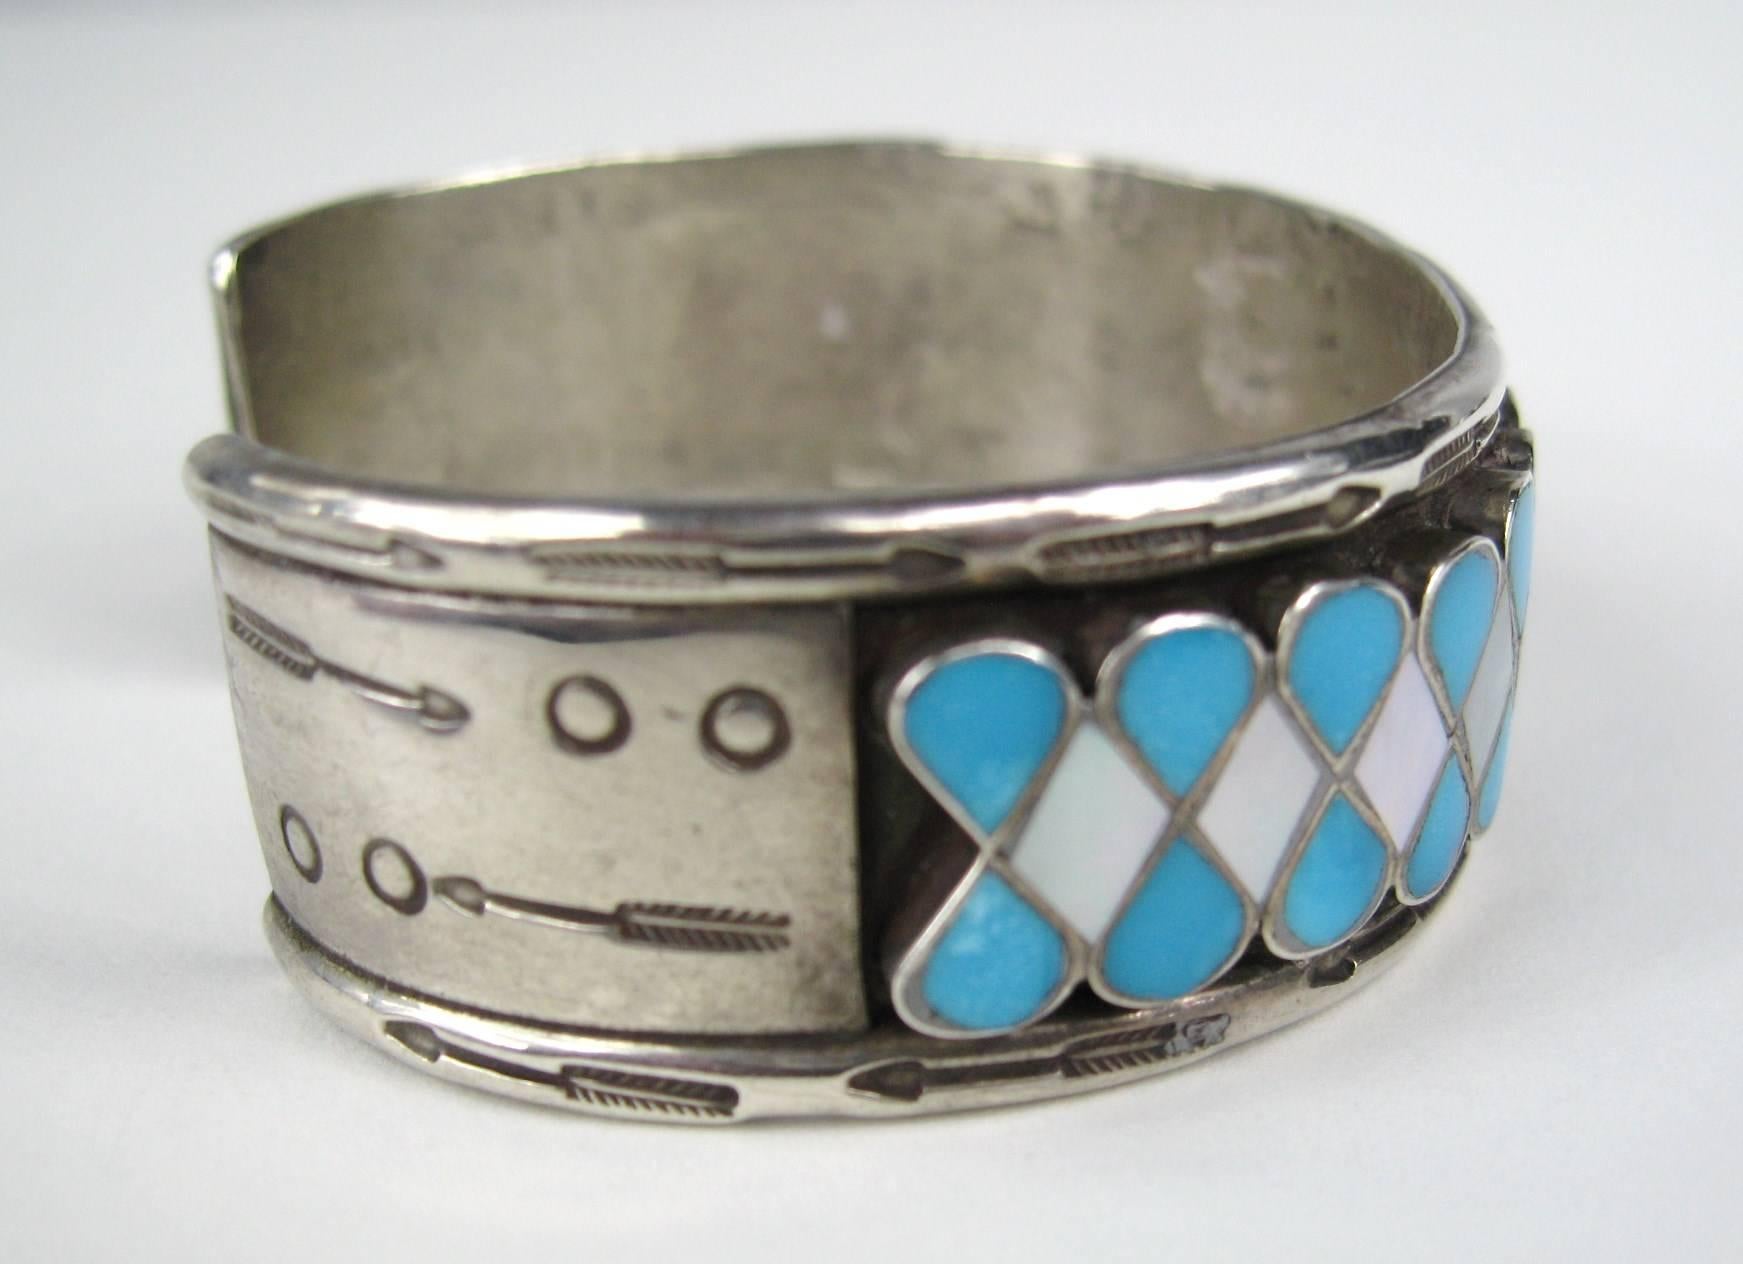 Zuni Arrow motif design on this Turquoise Cuff Bracelet. Hallmarked CL. Will fit a 6 to 7 in wrist nicely. It can be adjusted a bit smaller or larger. Measuring .81 in wide - 1.20 in the opening. This is out of a massive collection of New Old stock